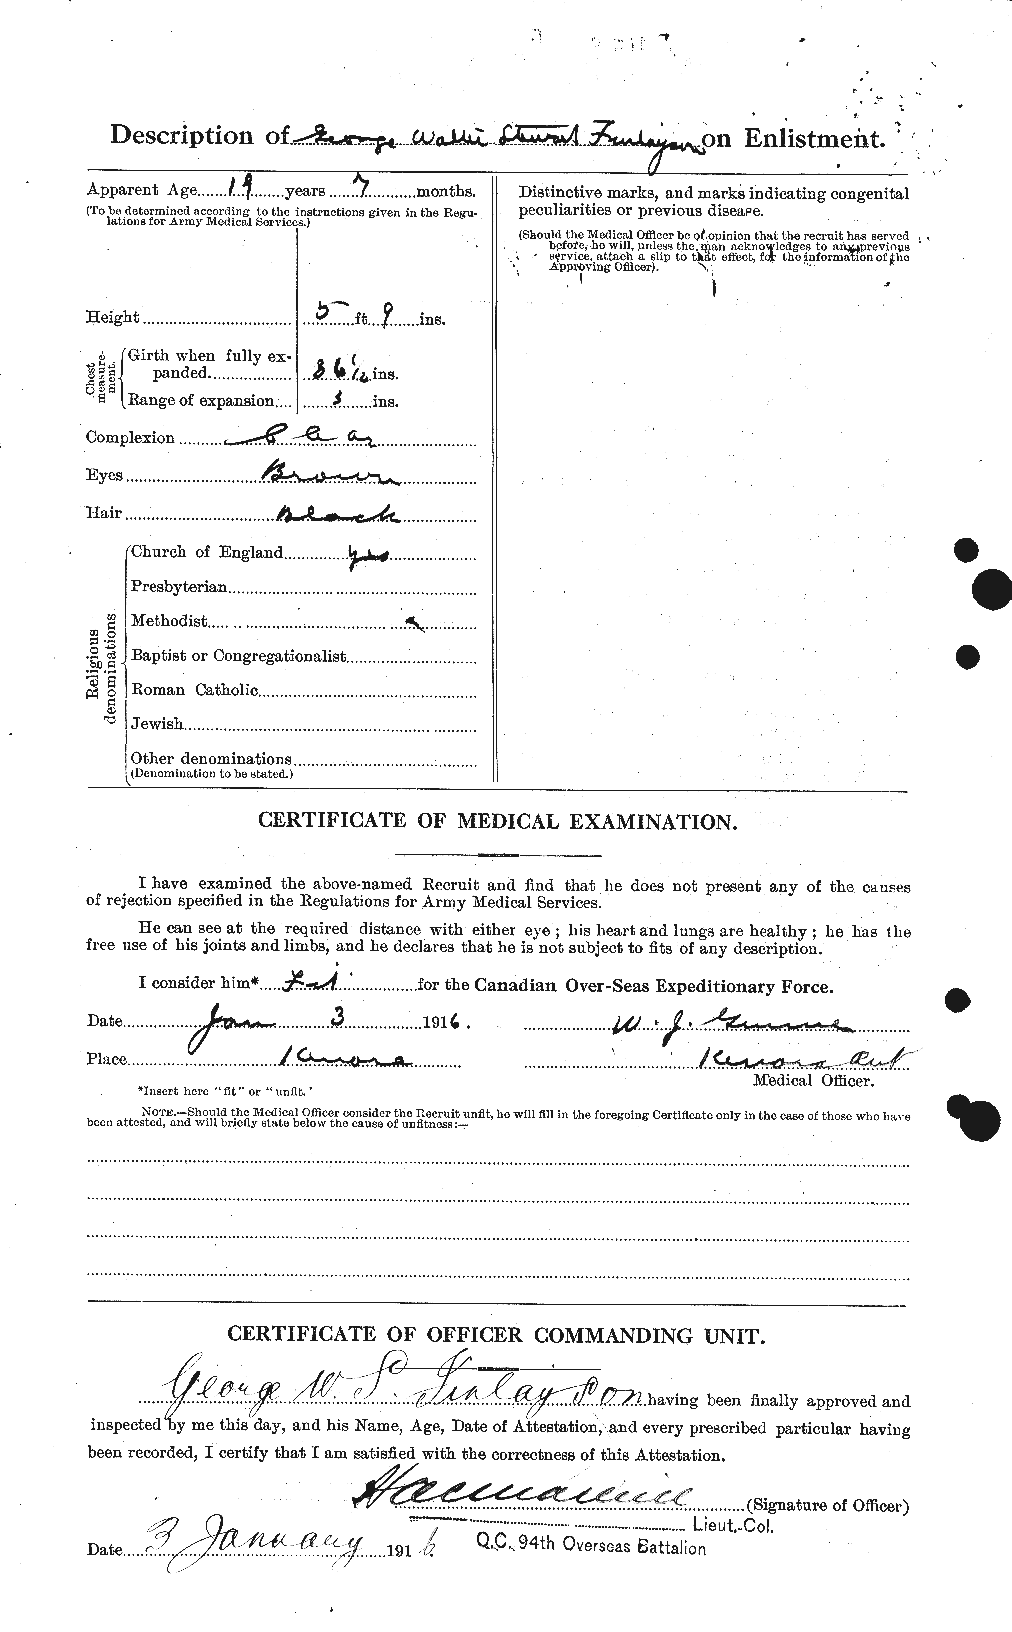 Personnel Records of the First World War - CEF 324169b